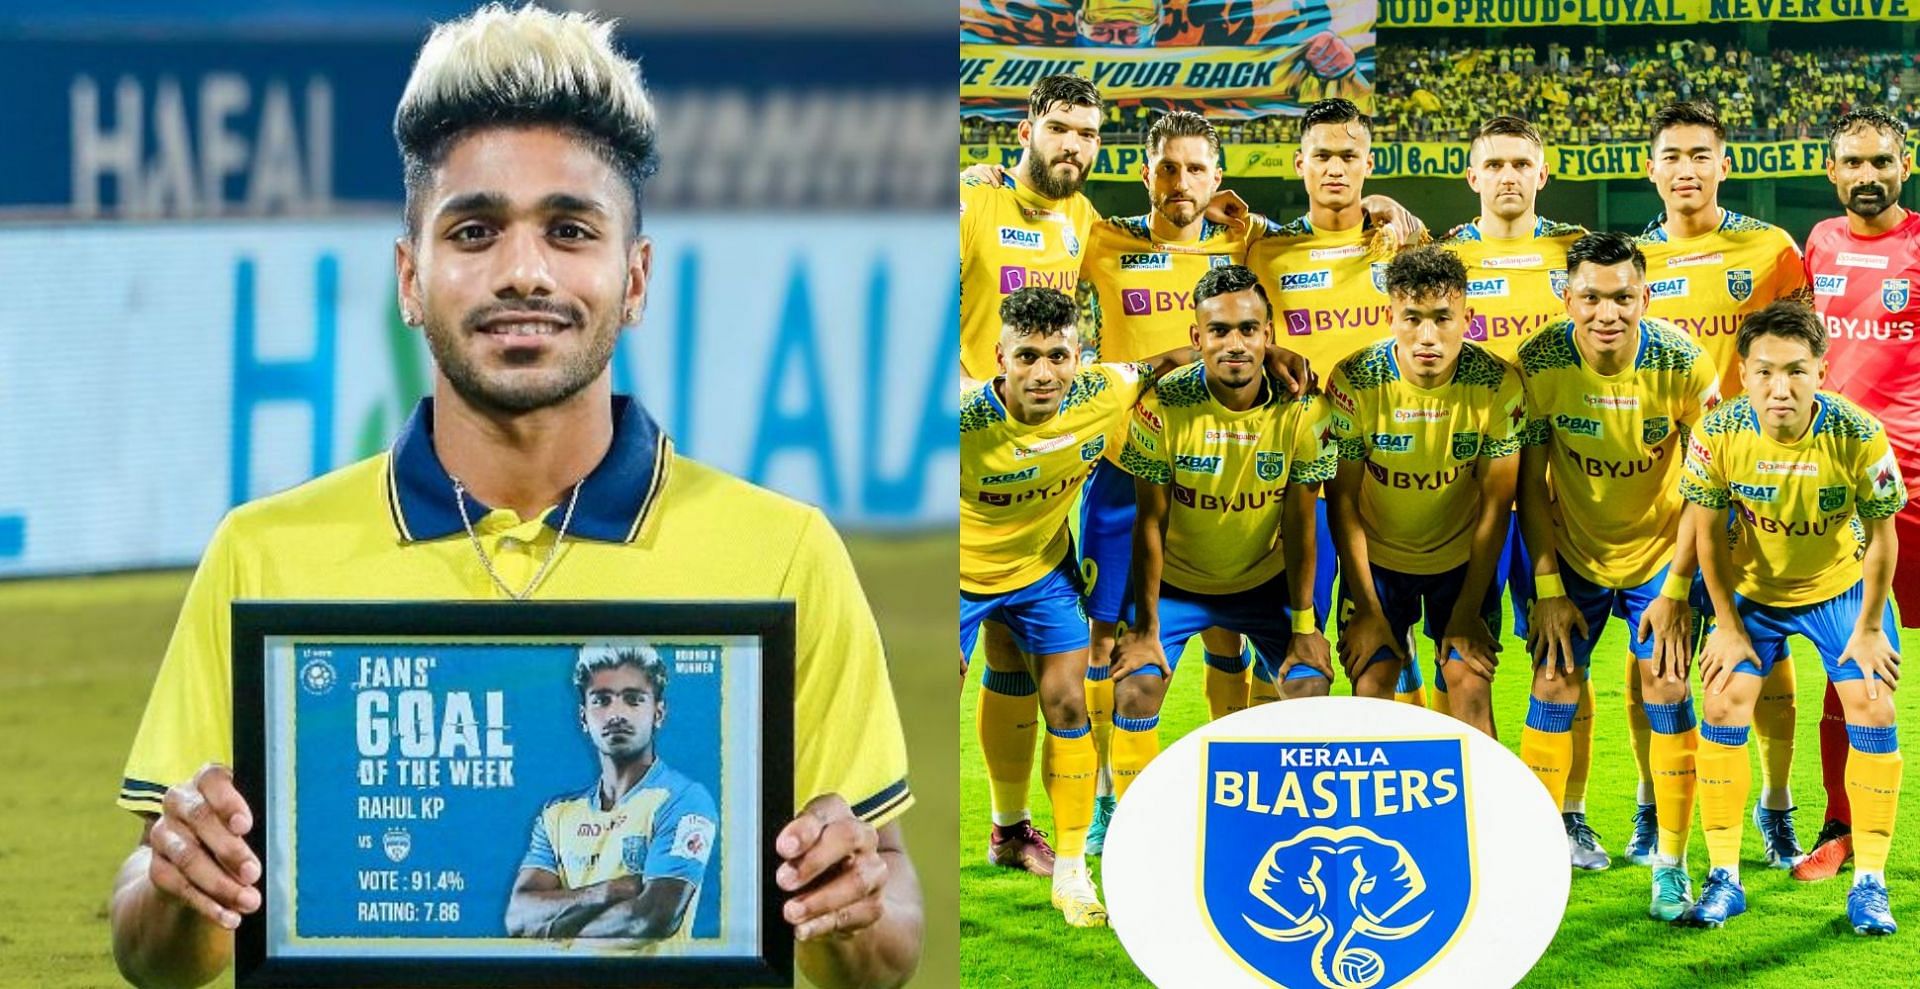 Kerala Blasters FC winger Rahul KP has come up with an Instagram story following his team